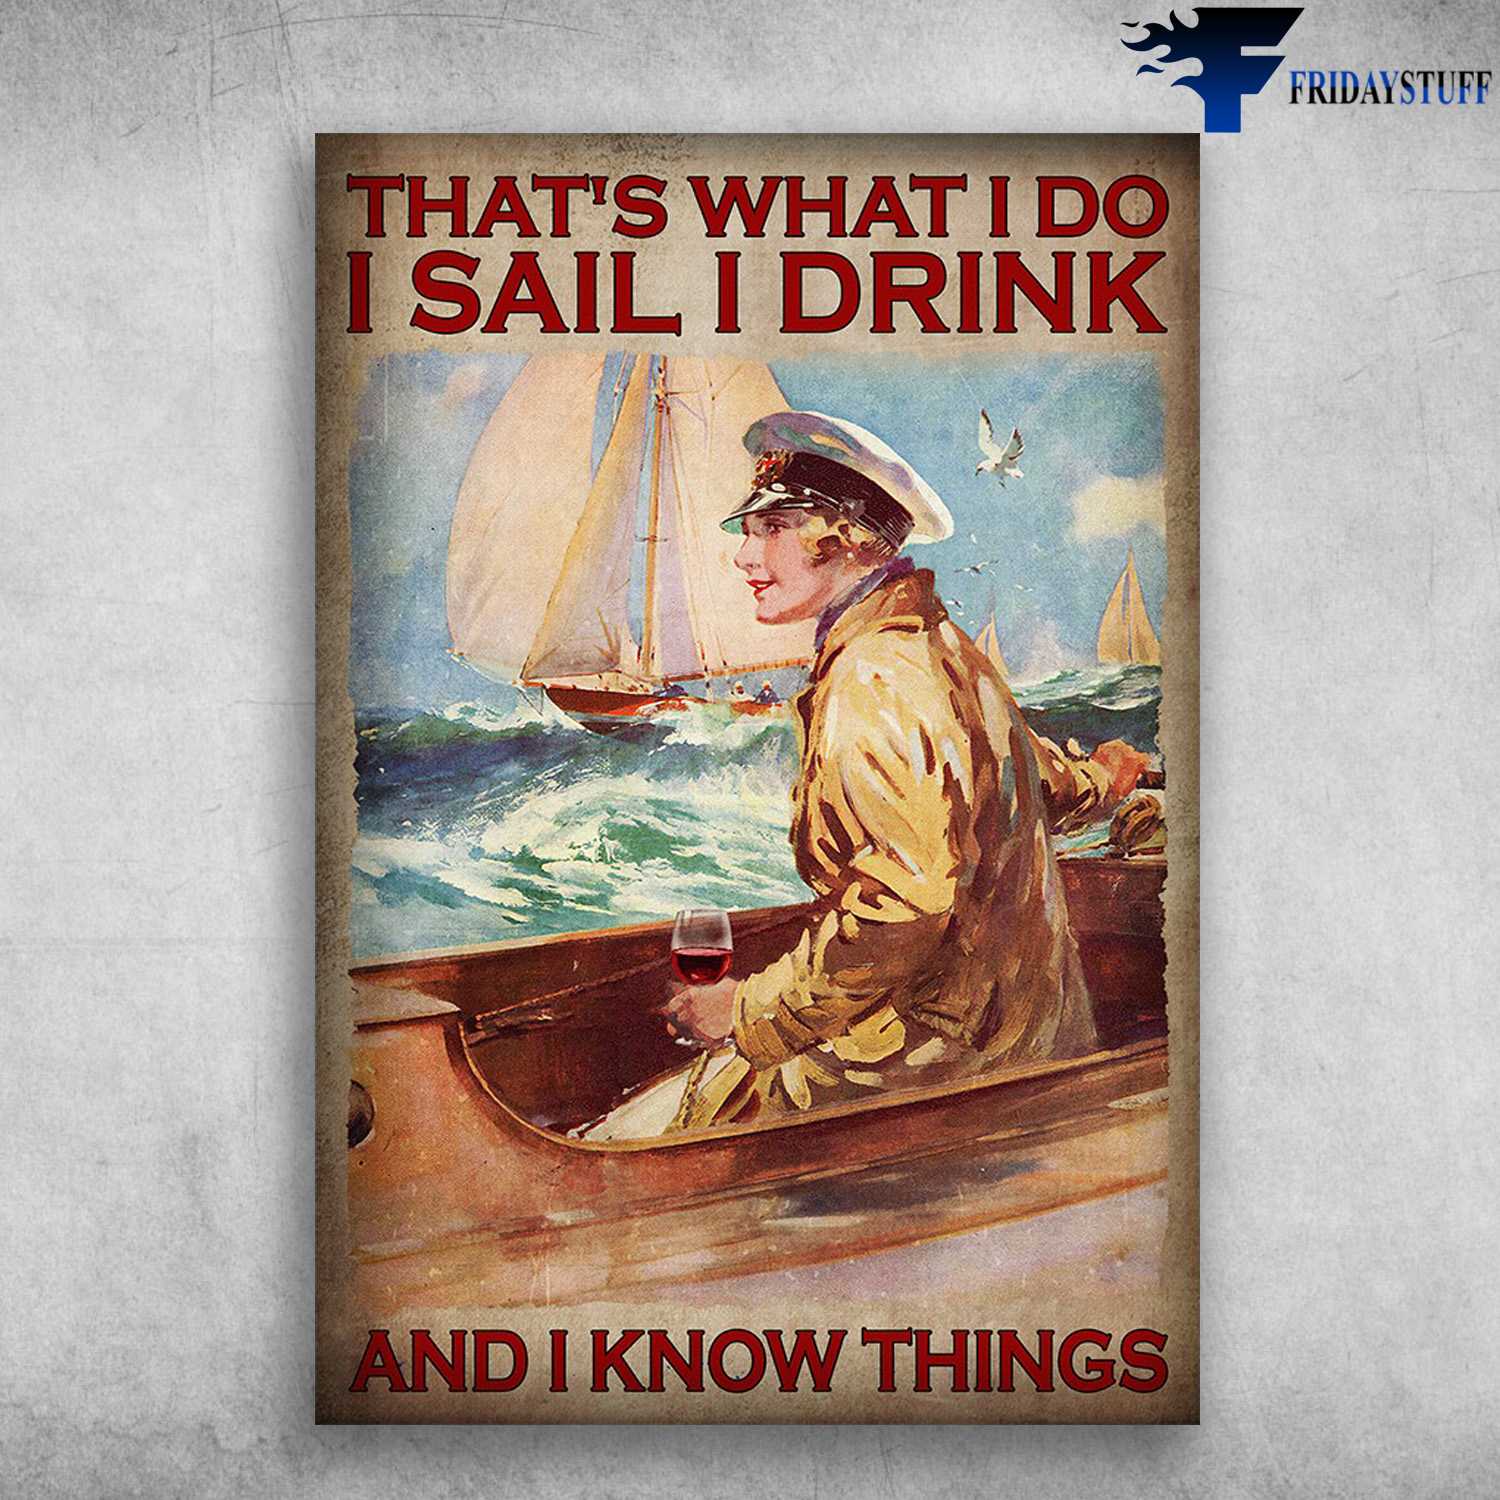 Female Sailor, Sail Wine - That's What I Do, I Sail, I Drink, And I Know Things